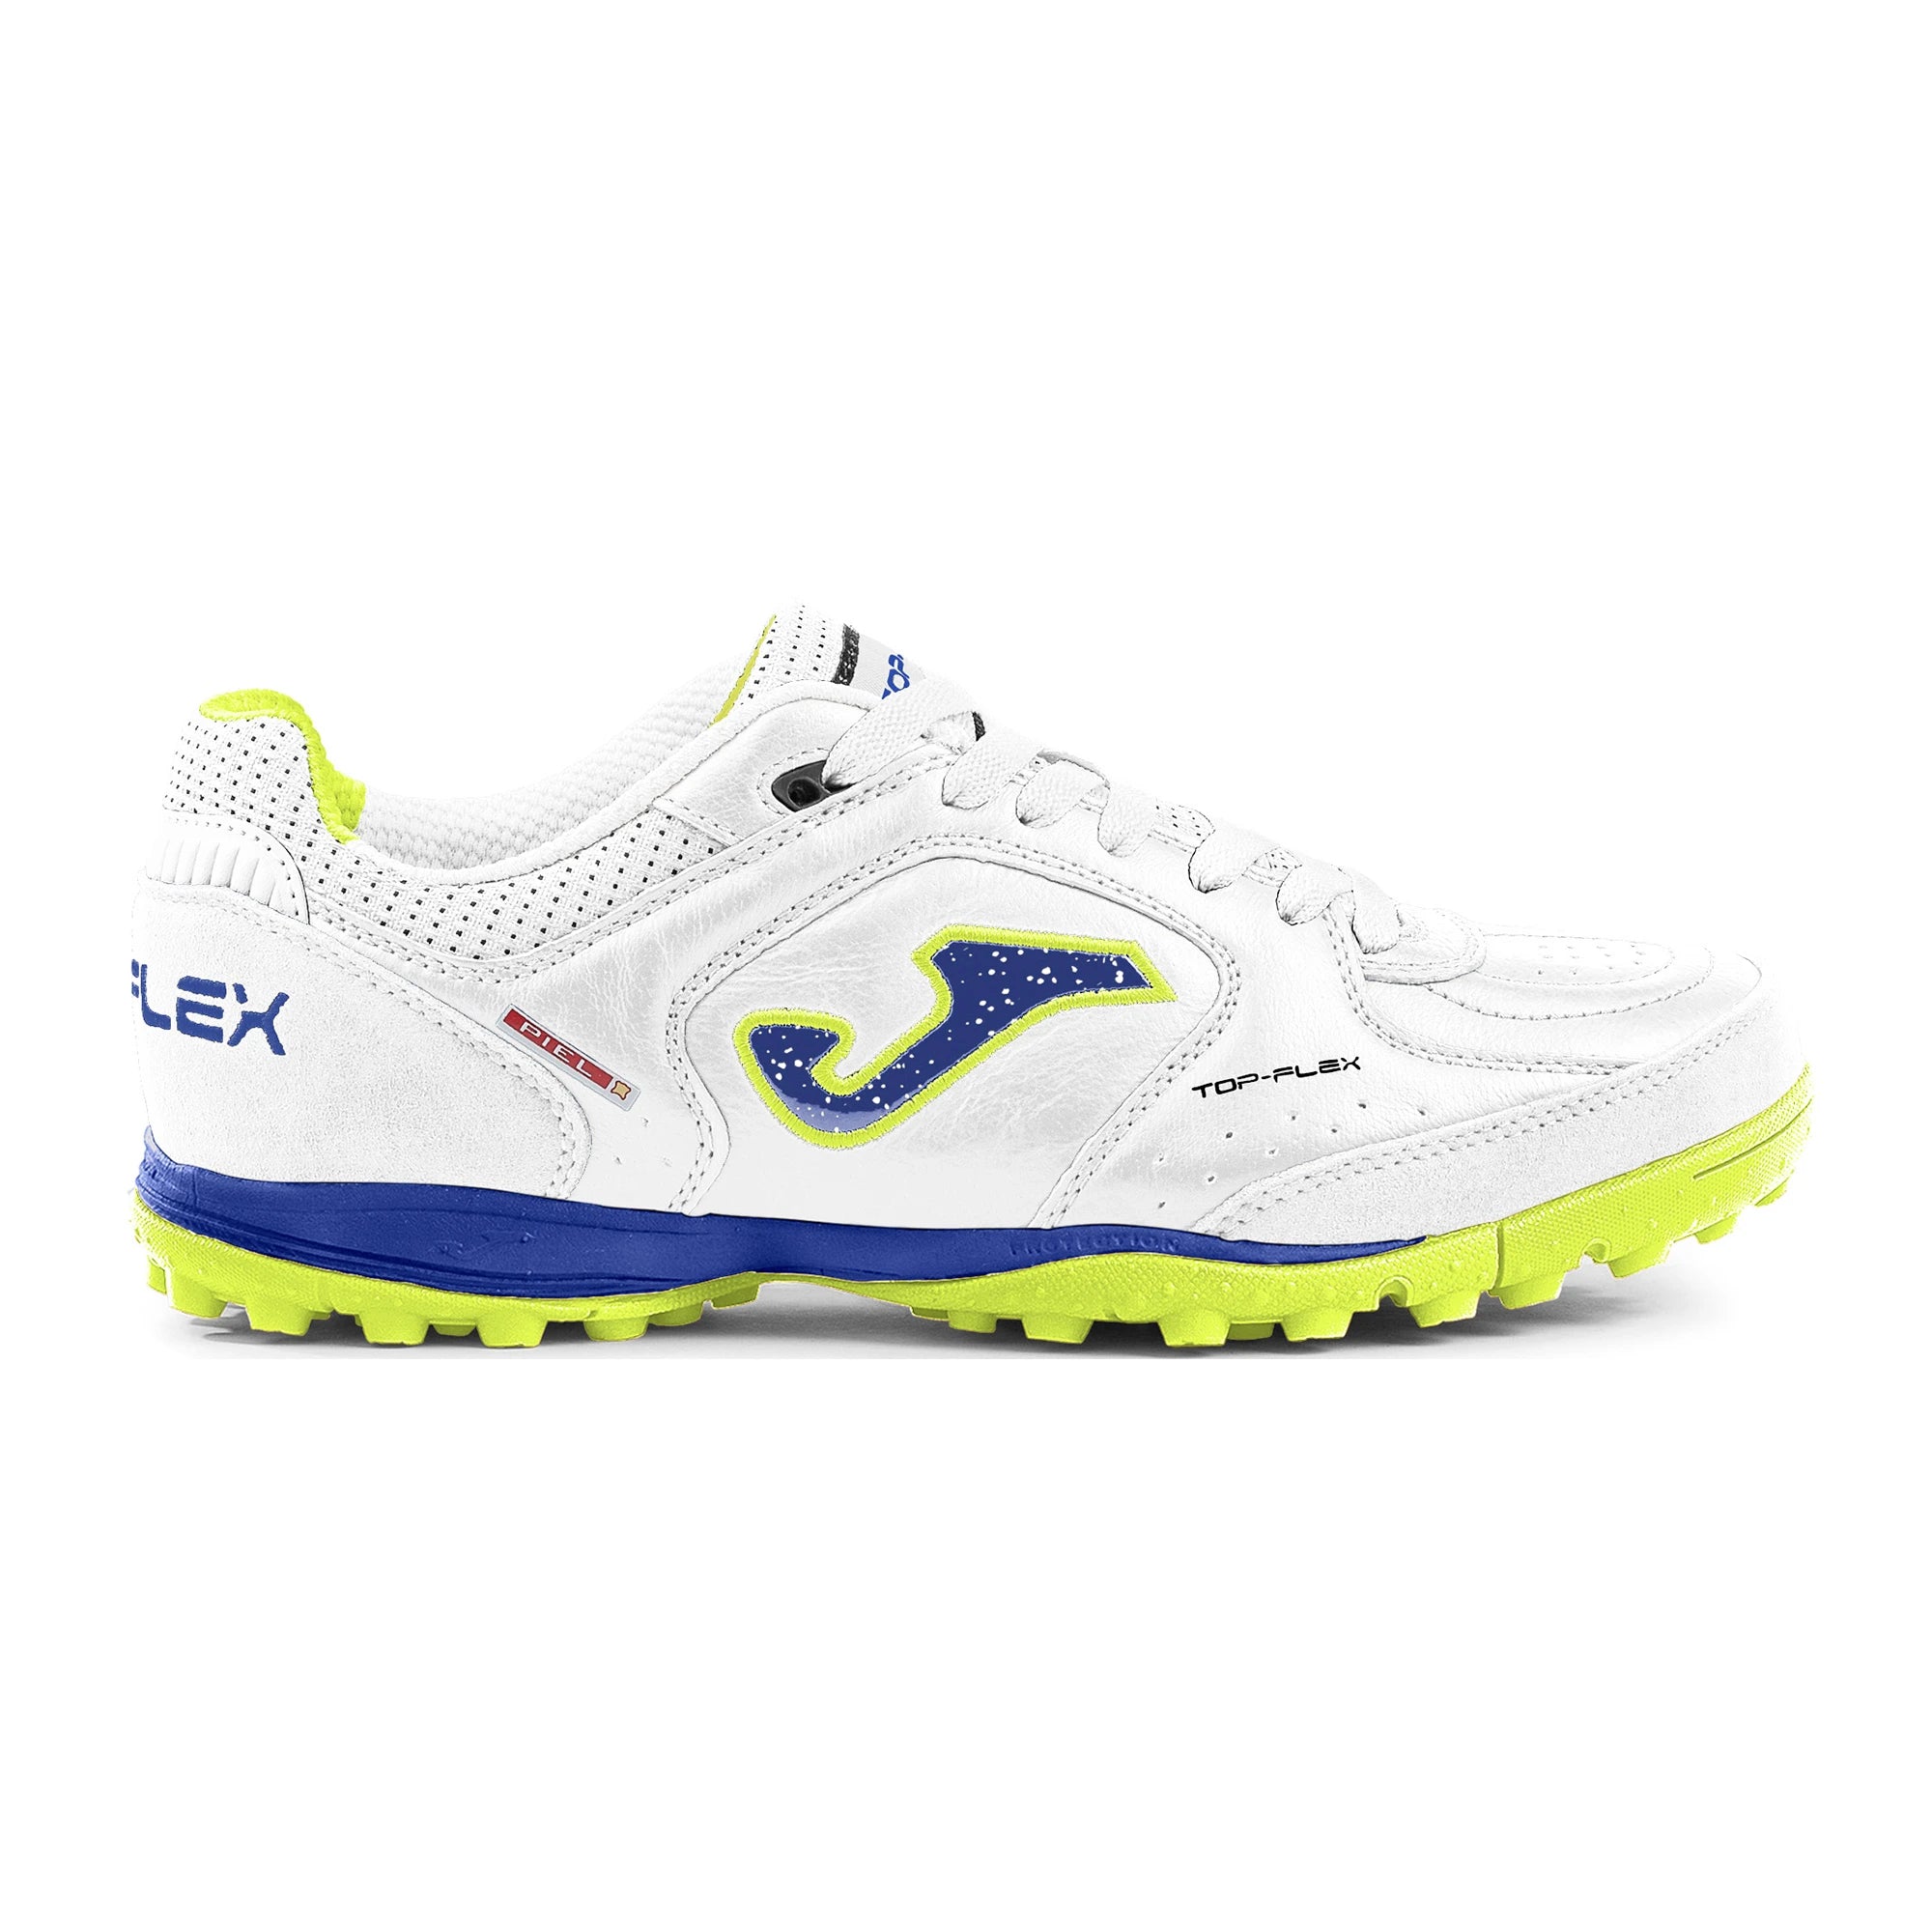 Buy white Joma Top Flex 2121 Turf Soccer Shoes